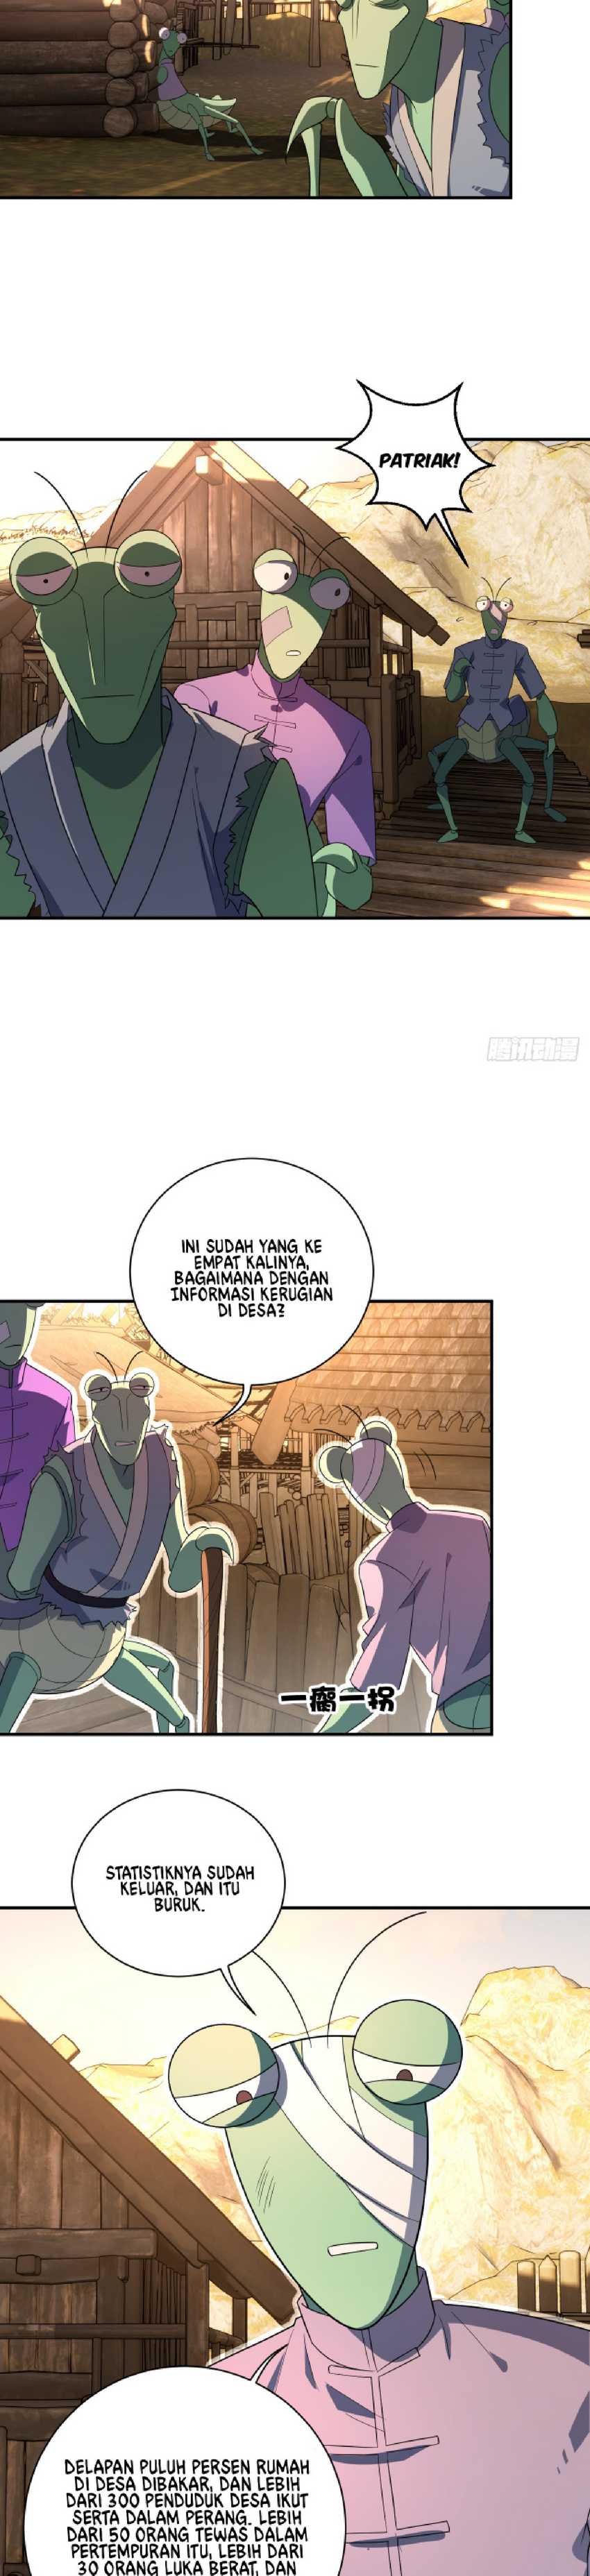 The Strongest Snail Has A Mansion In The World Of Snails Chapter 07 bahasa indonesia